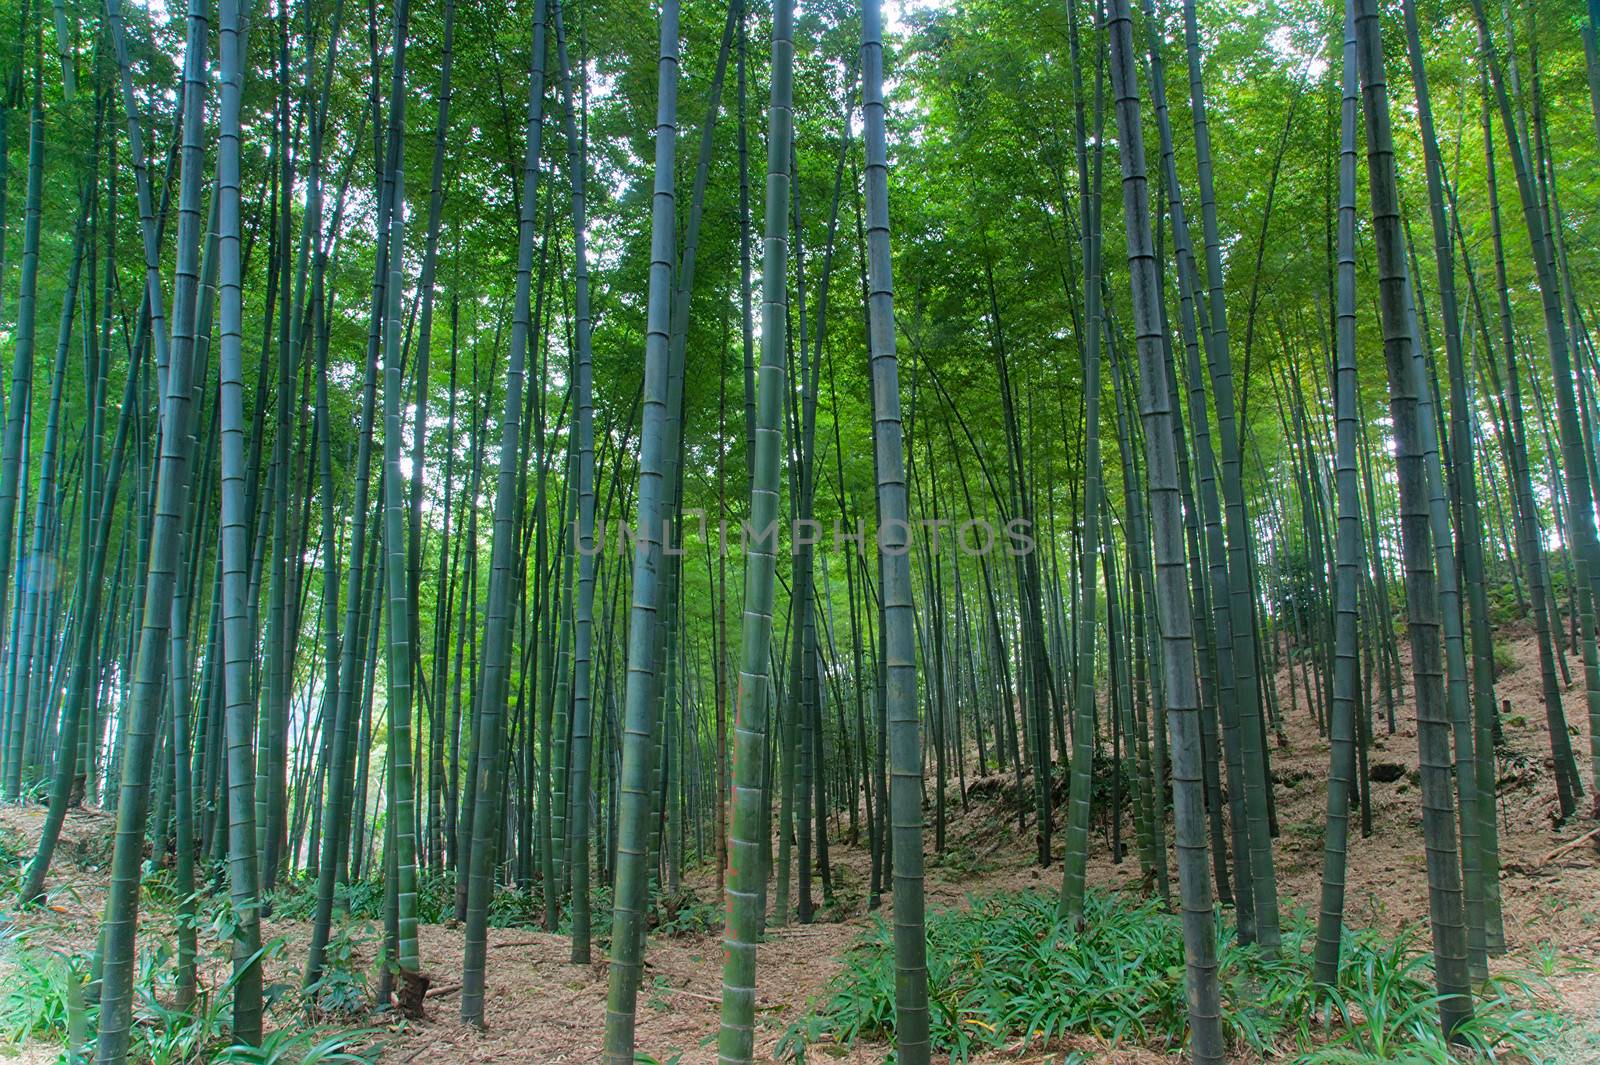 landscape of Bamboo forest in Sichuan Bamboo Sea  - taken in Sichuan, China by xfdly5